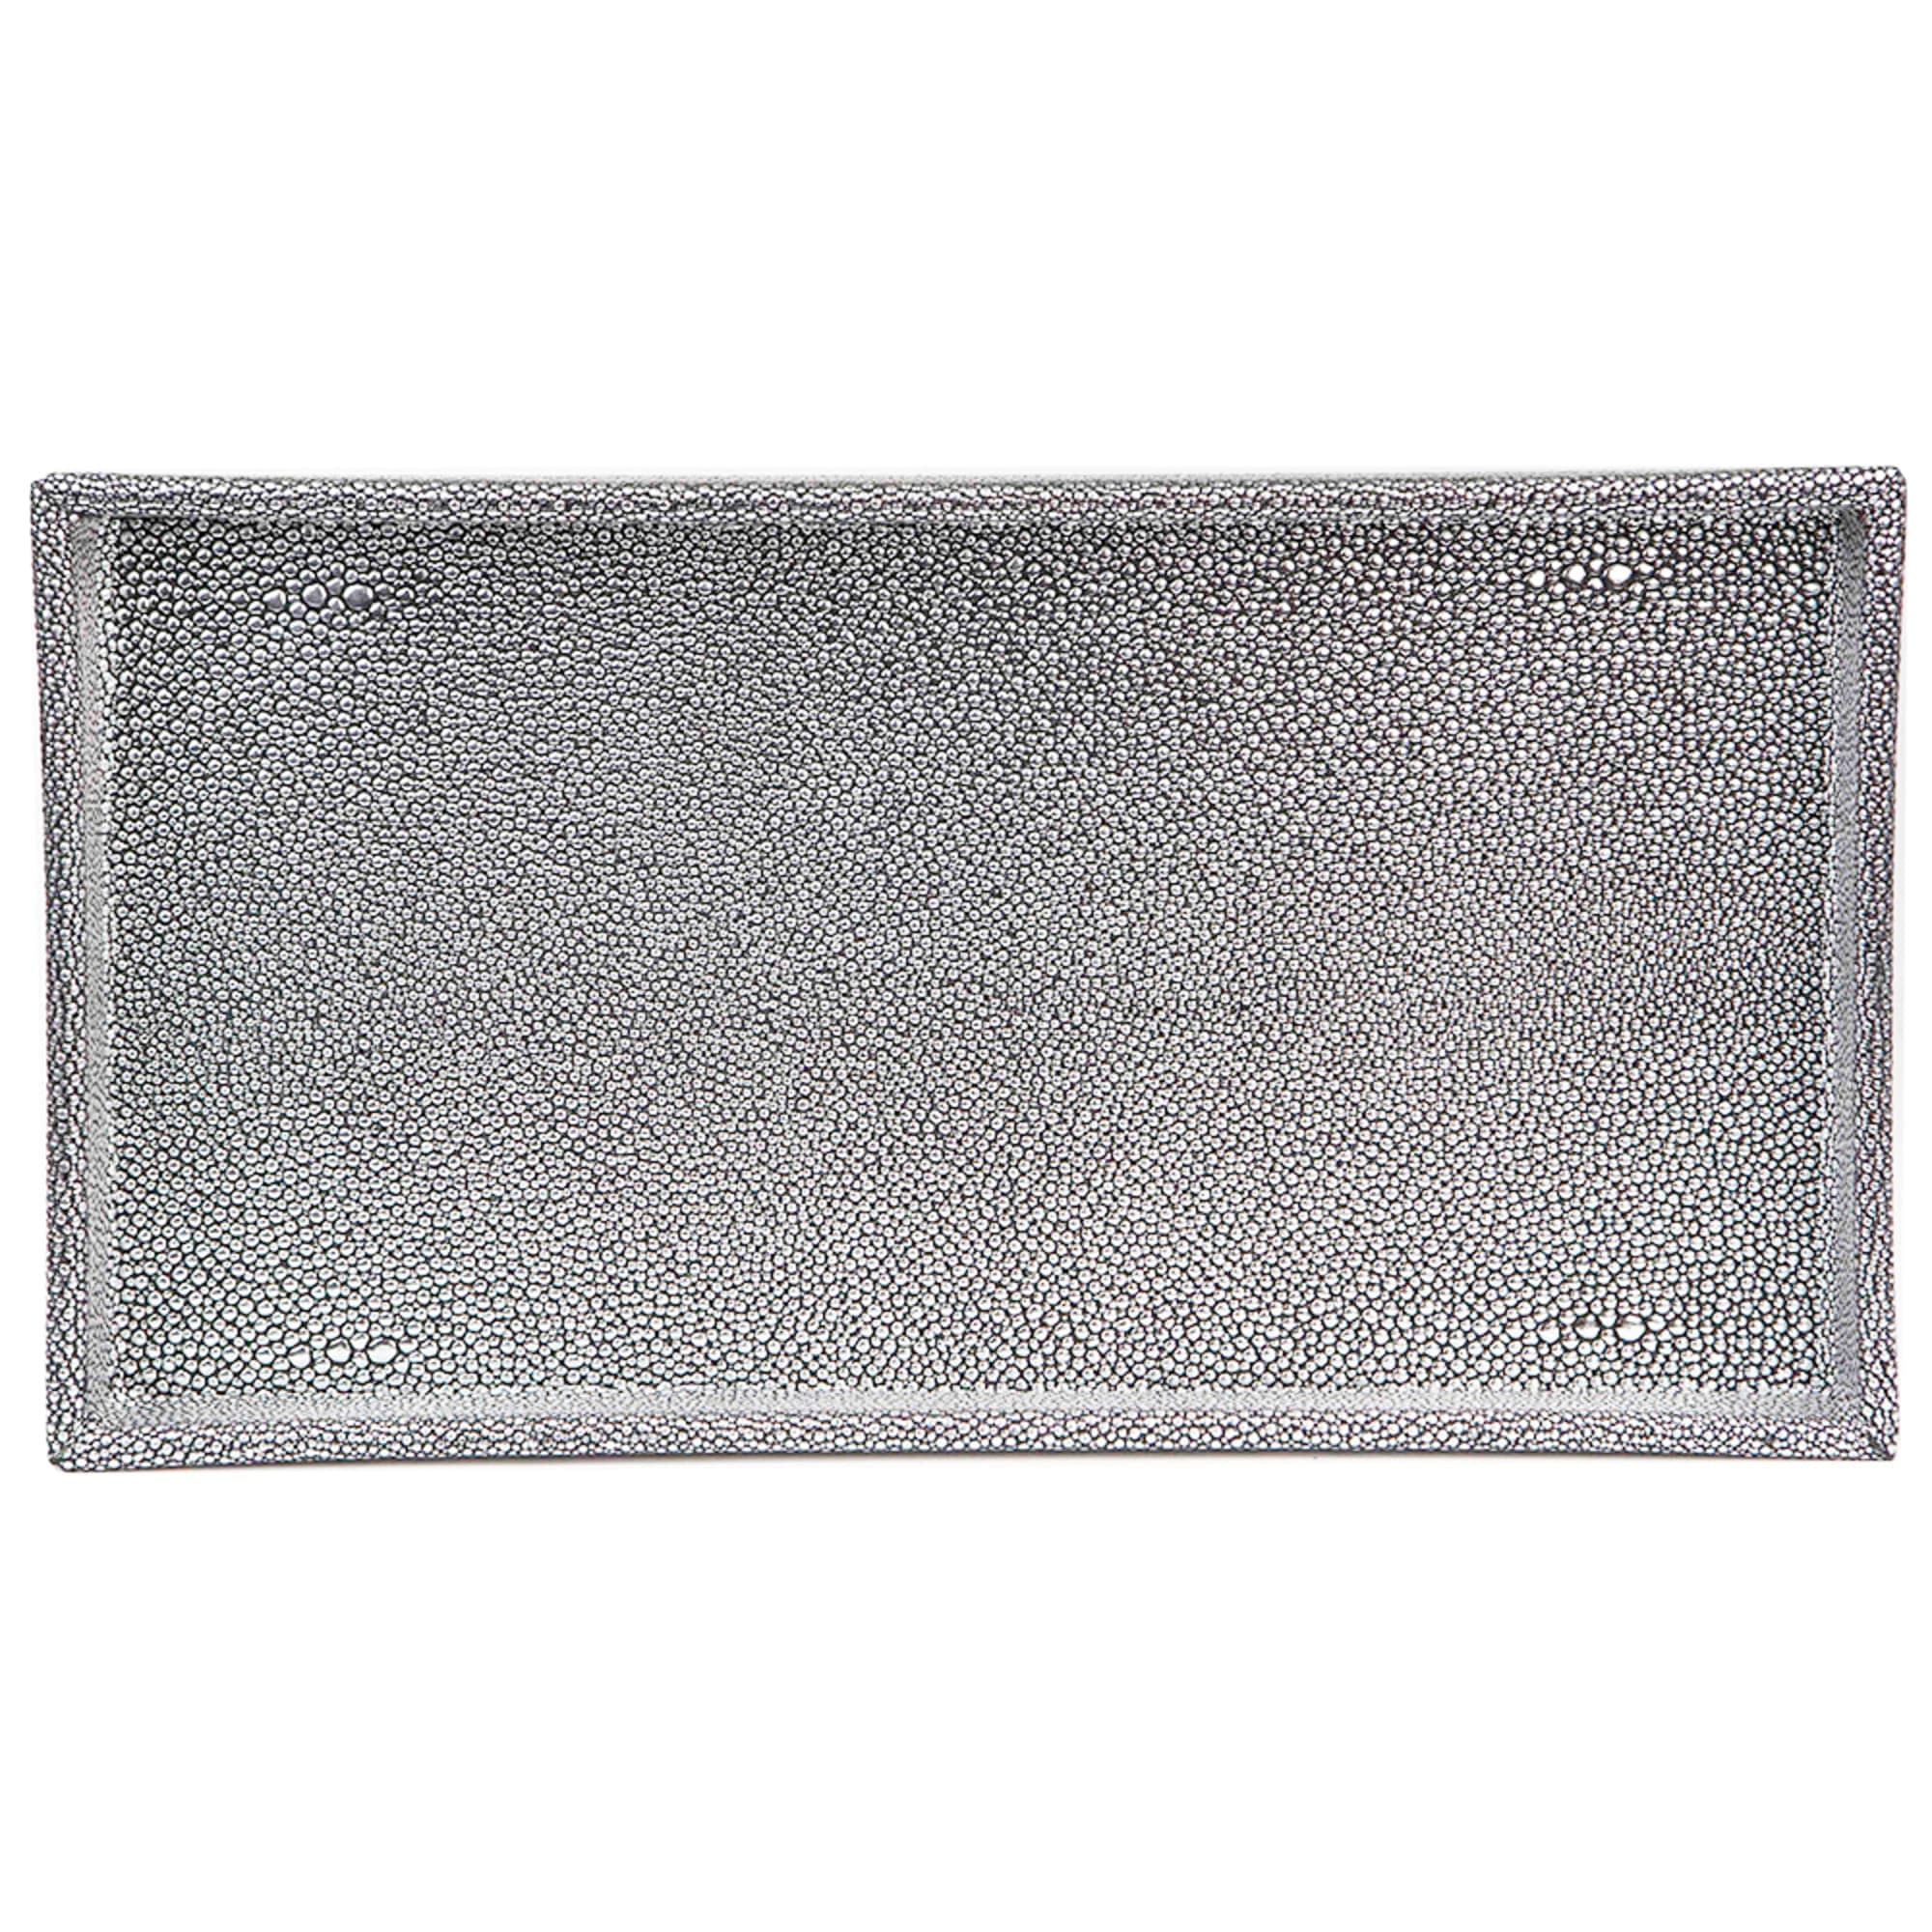 Home Basics Plastic Vanity Tray, Silver $5.00 EACH, CASE PACK OF 8